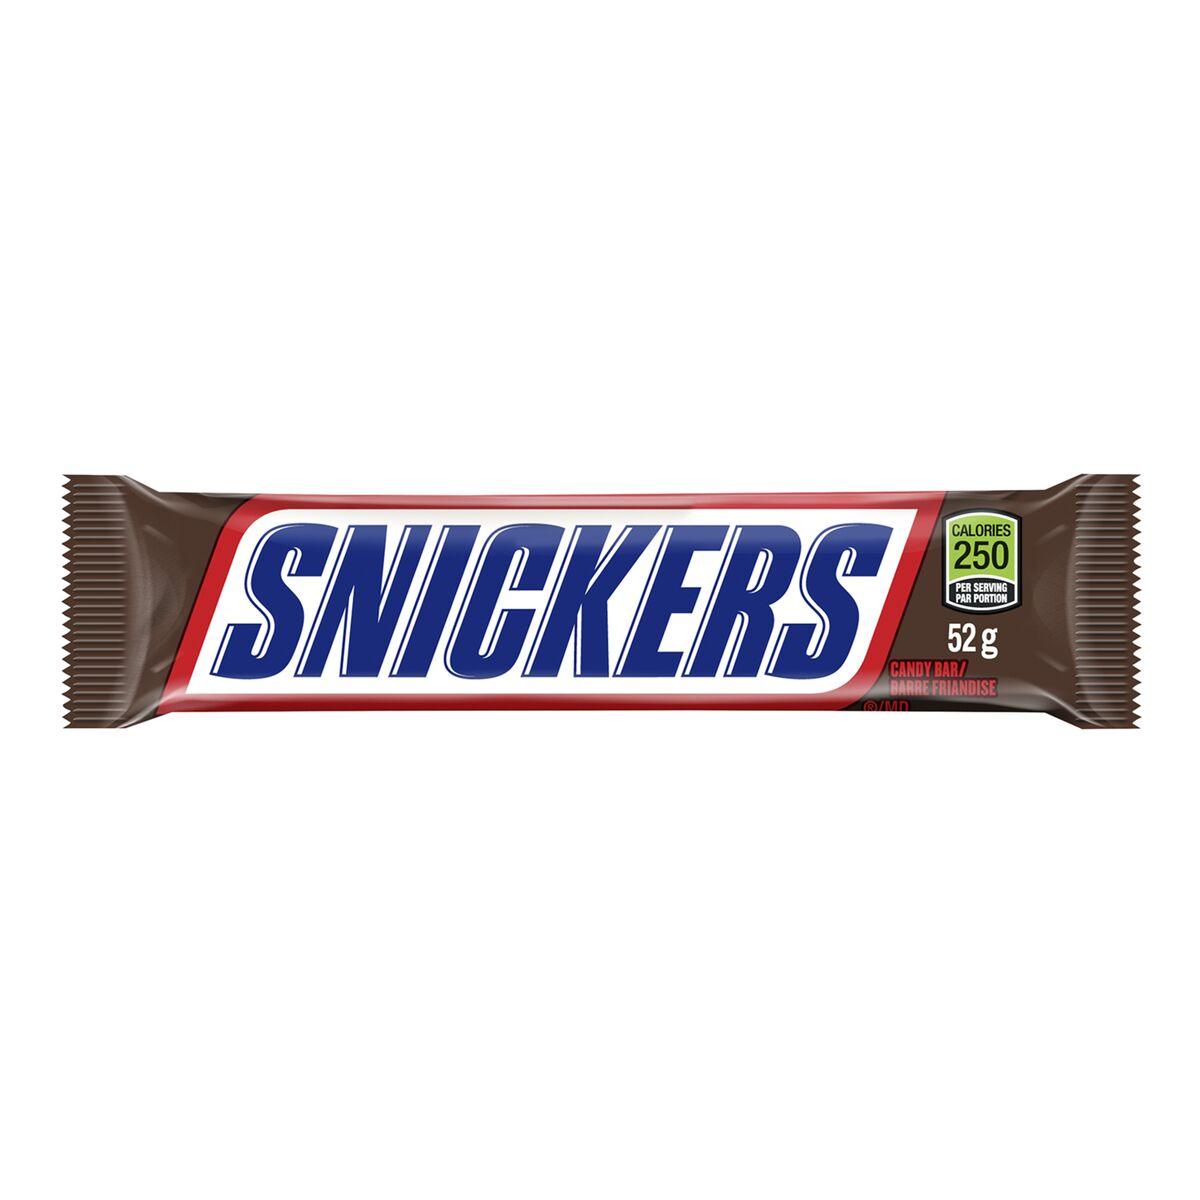 Snickers Chocolate Bar - The Snacks Box - Asian Snacks Store - The Snacks Box - Korean Snack - Japanese Snack